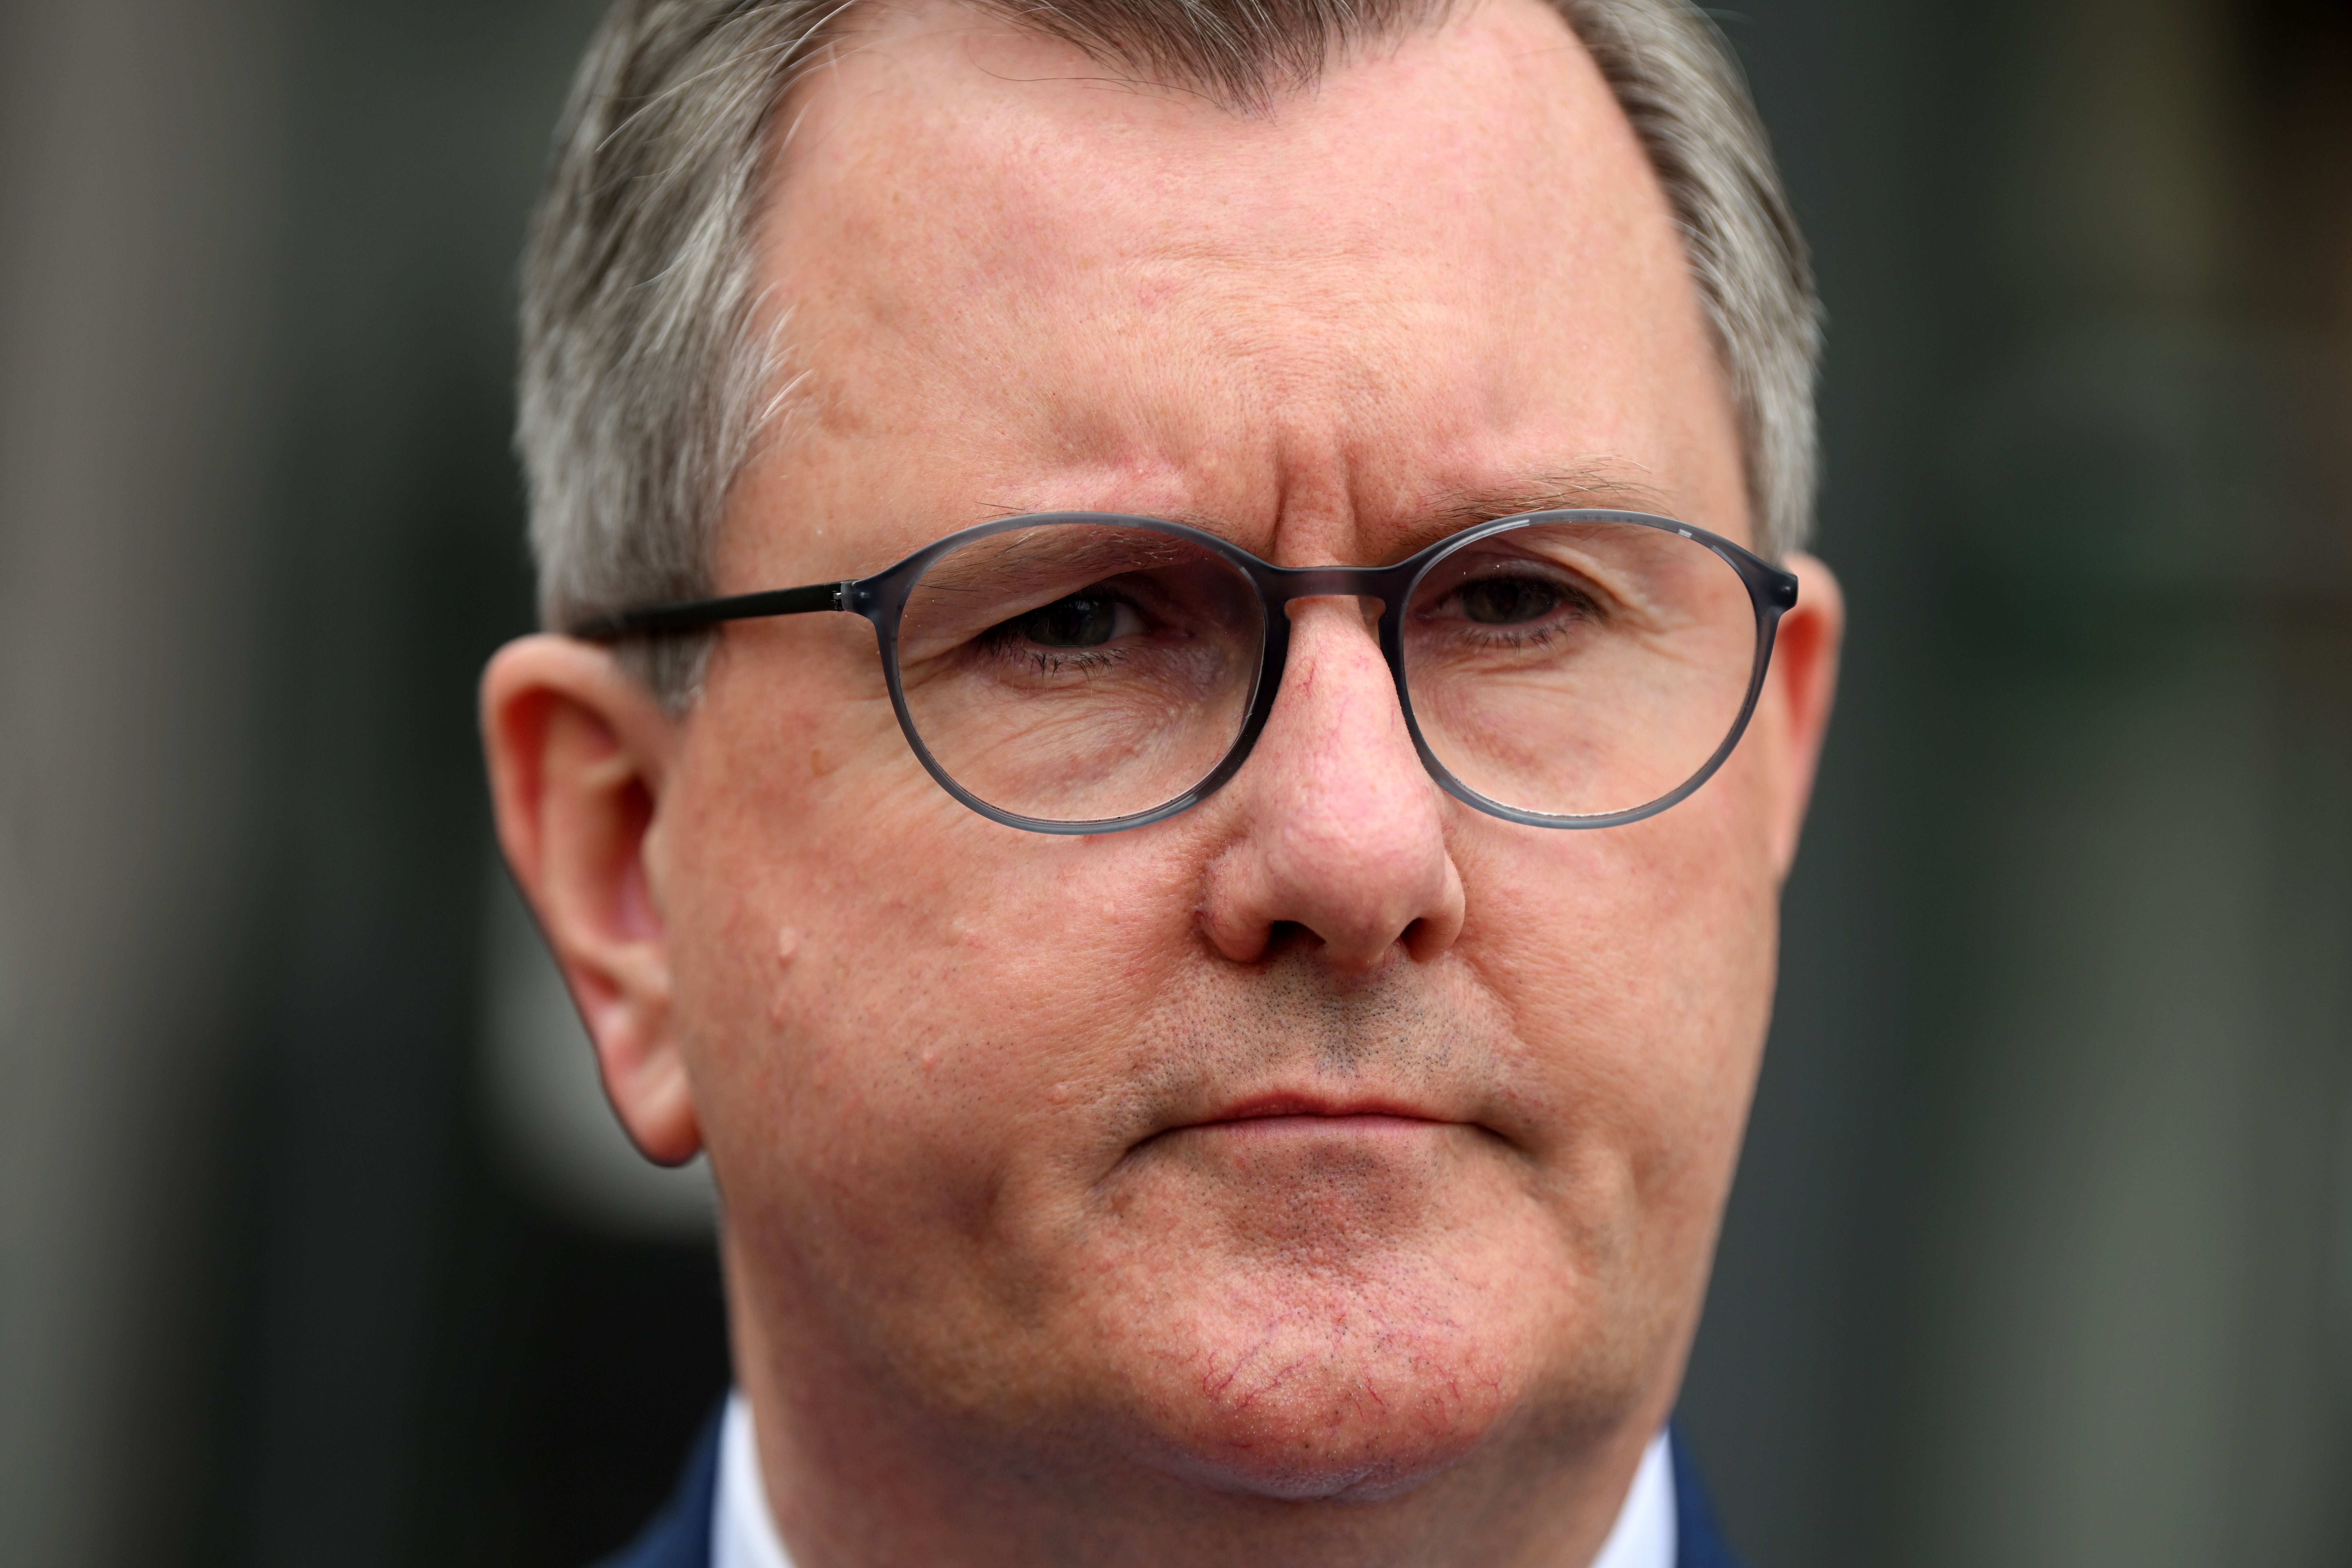 Sir Jeffrey Donaldson has resigned as leader of the Democratic Unionist Party